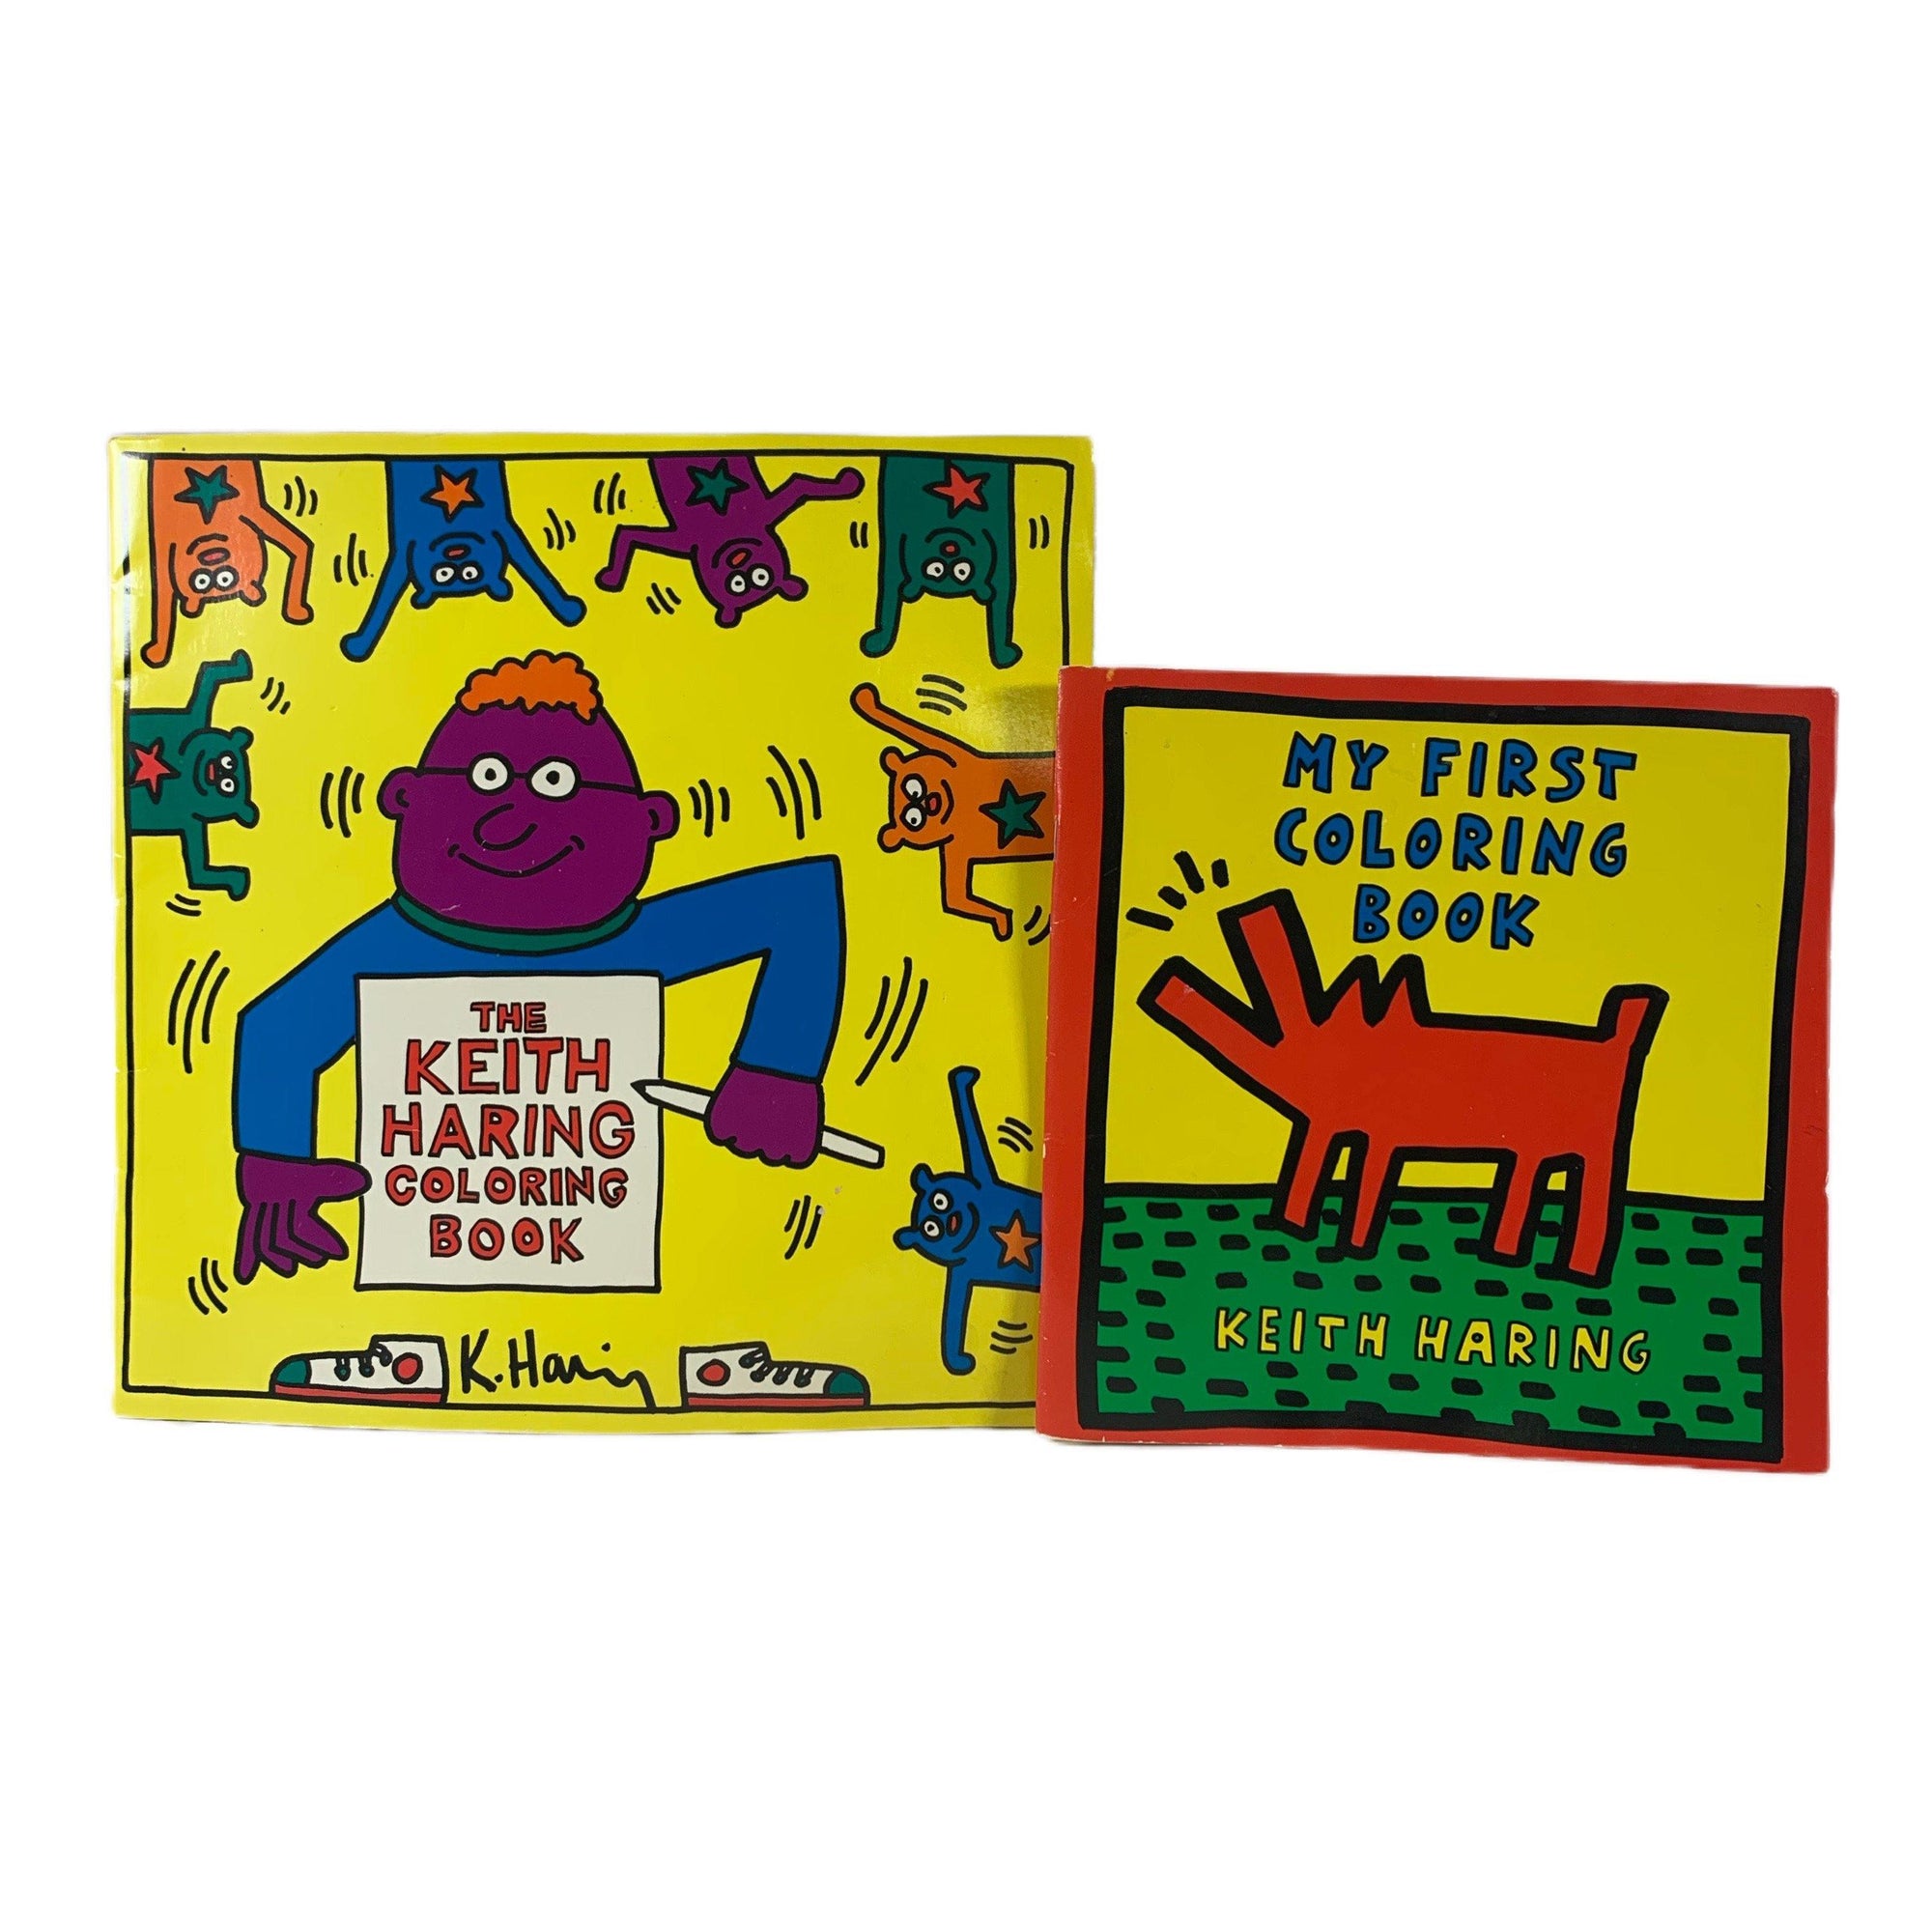 Vintage Keith Haring "1992" Coloring Books - jointcustodydc